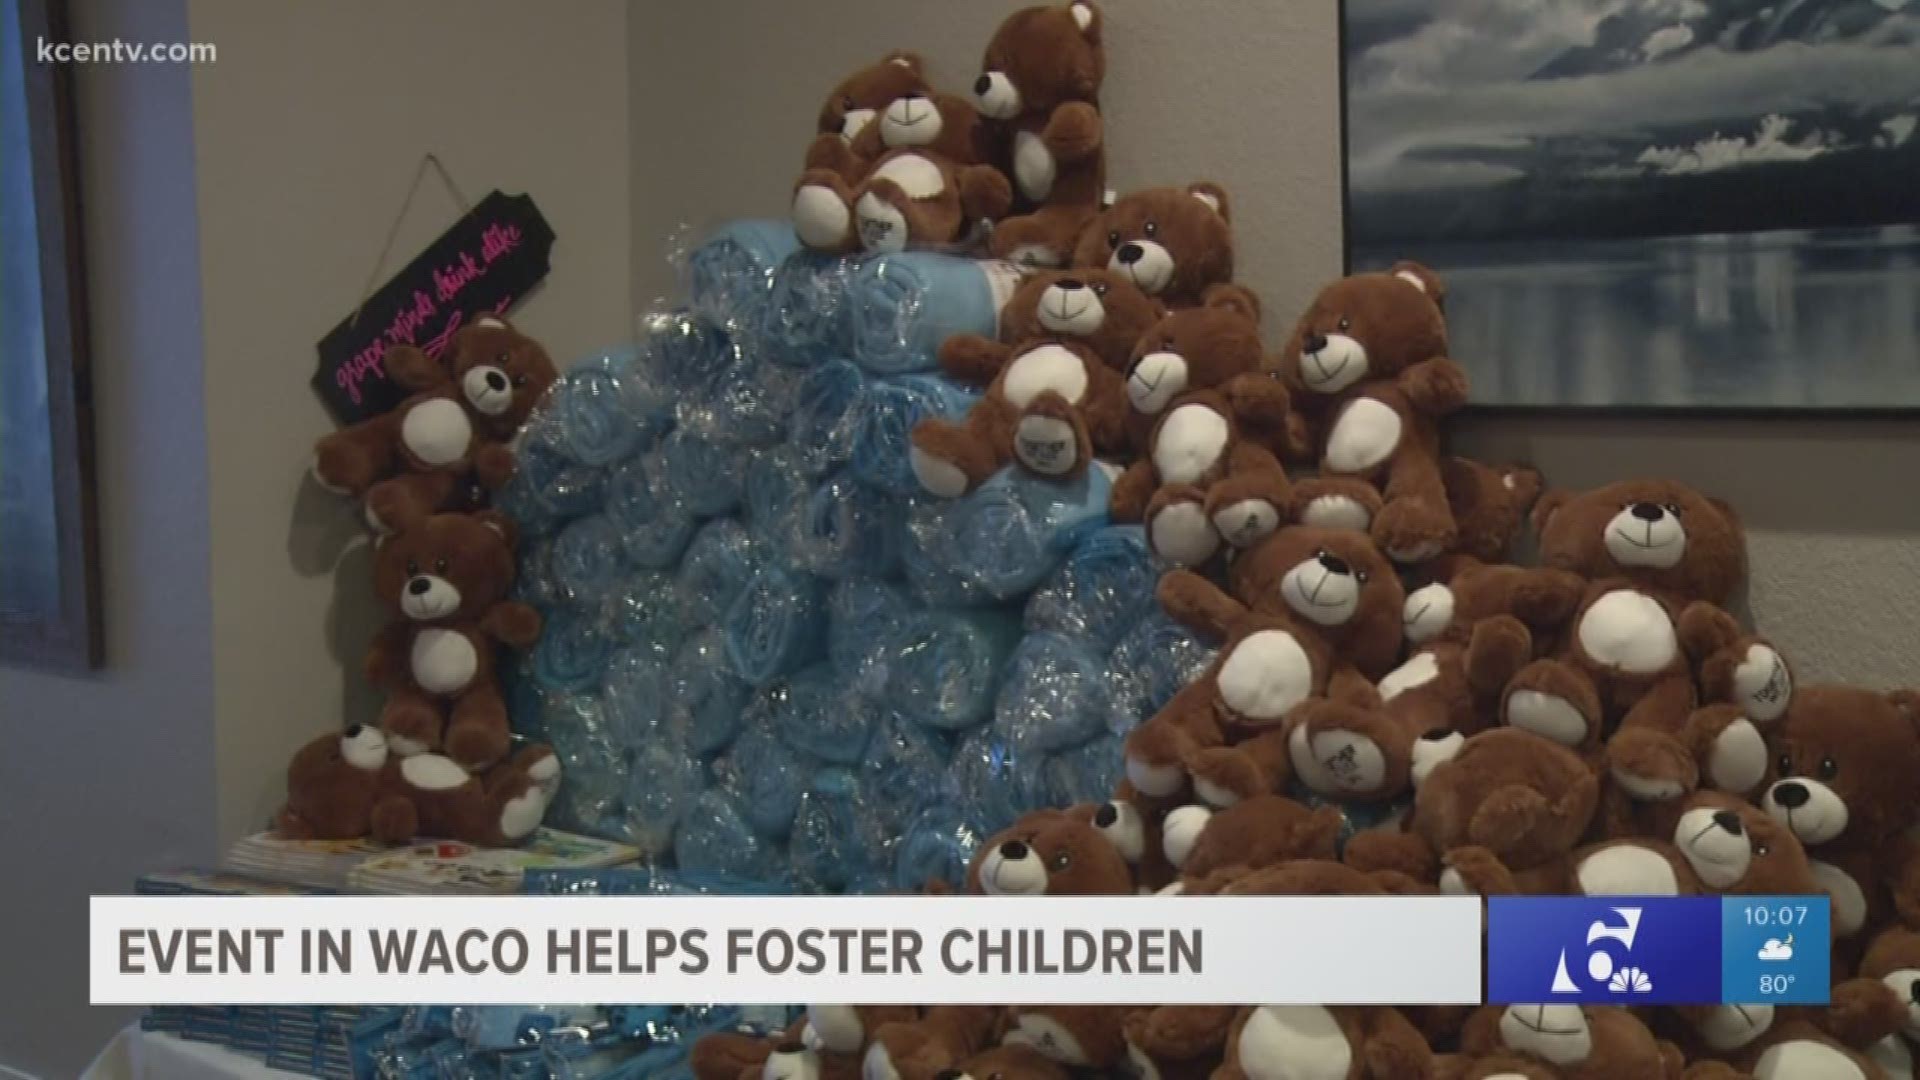 The Waco Fosters Love event gathered 60 bags meant to help foster children's transition a little easier.